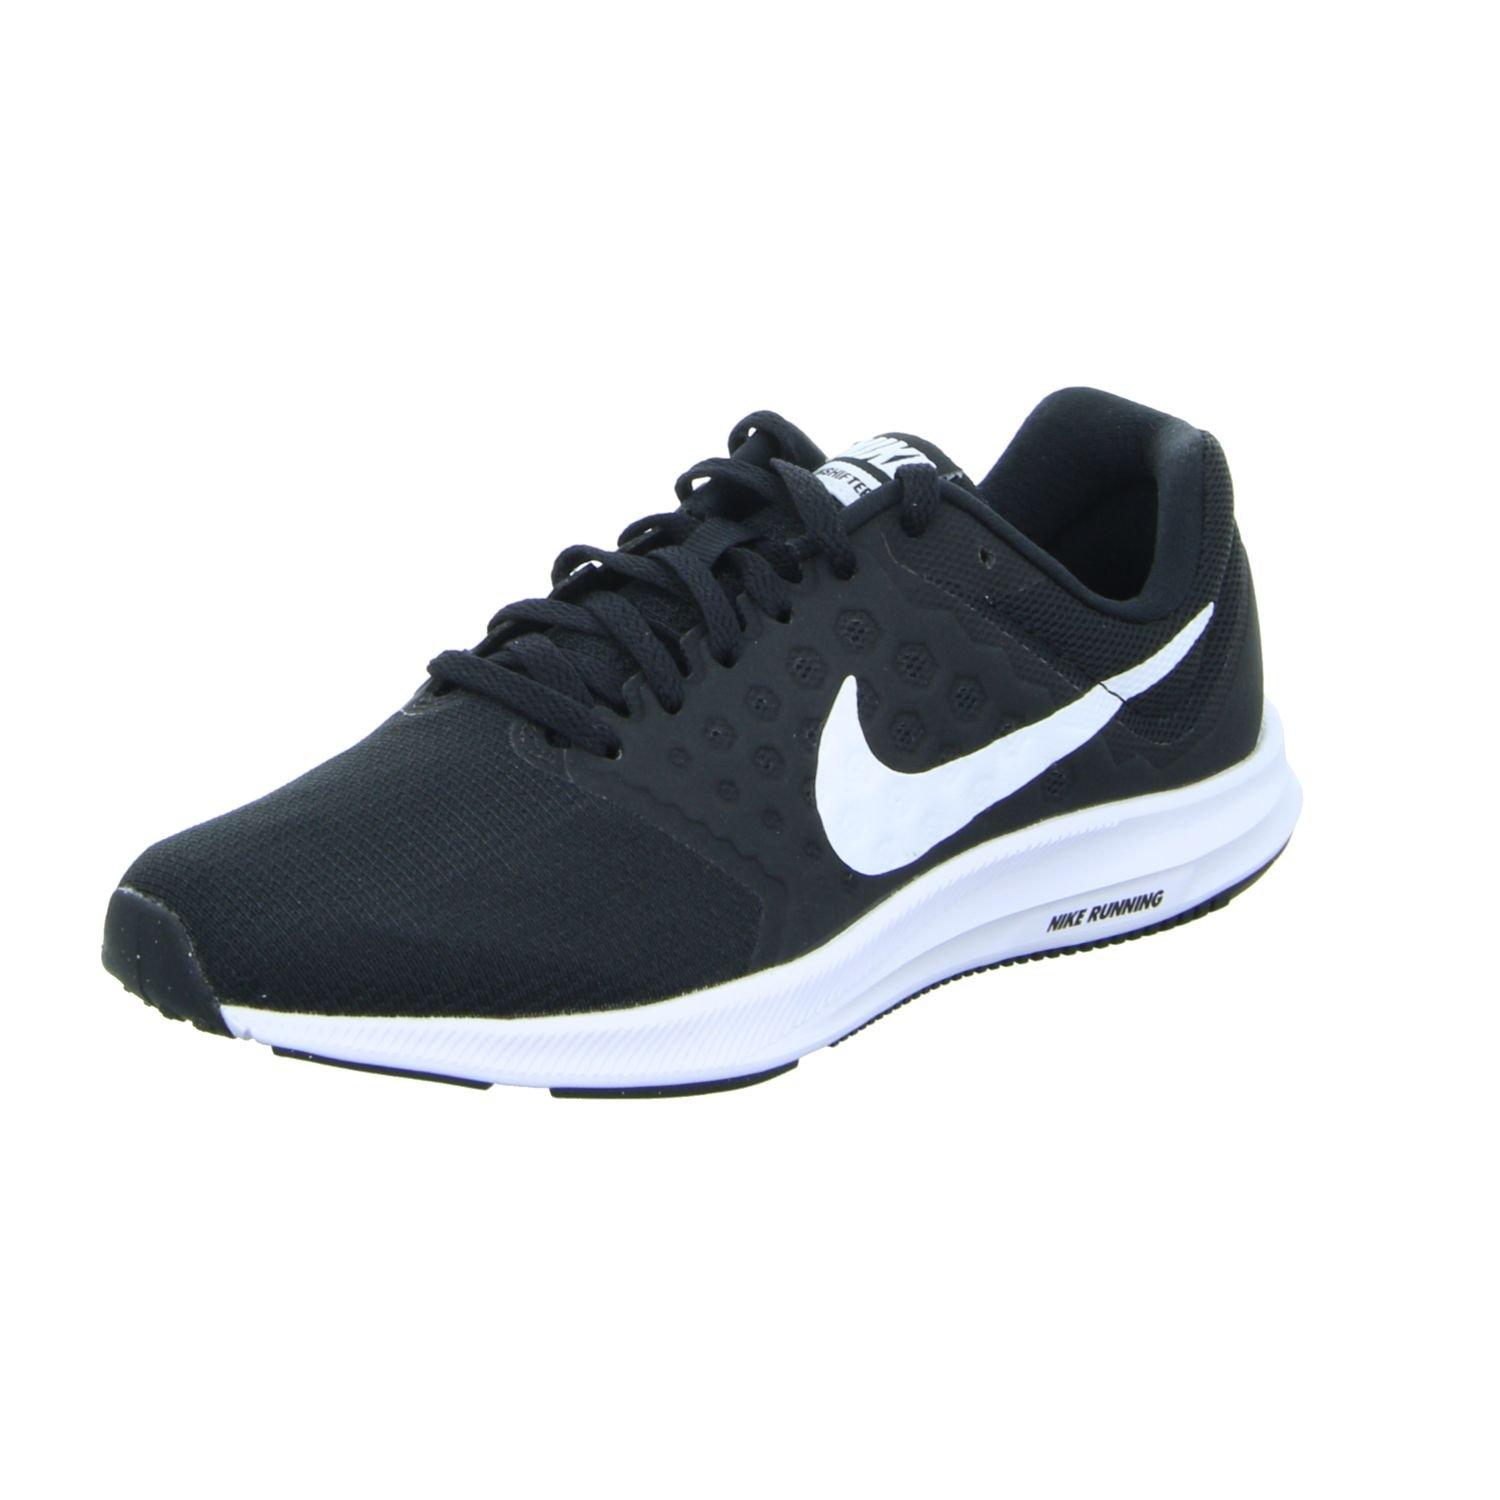 Nike Downshifter 7 Running Shoes in Black | Lyst UK